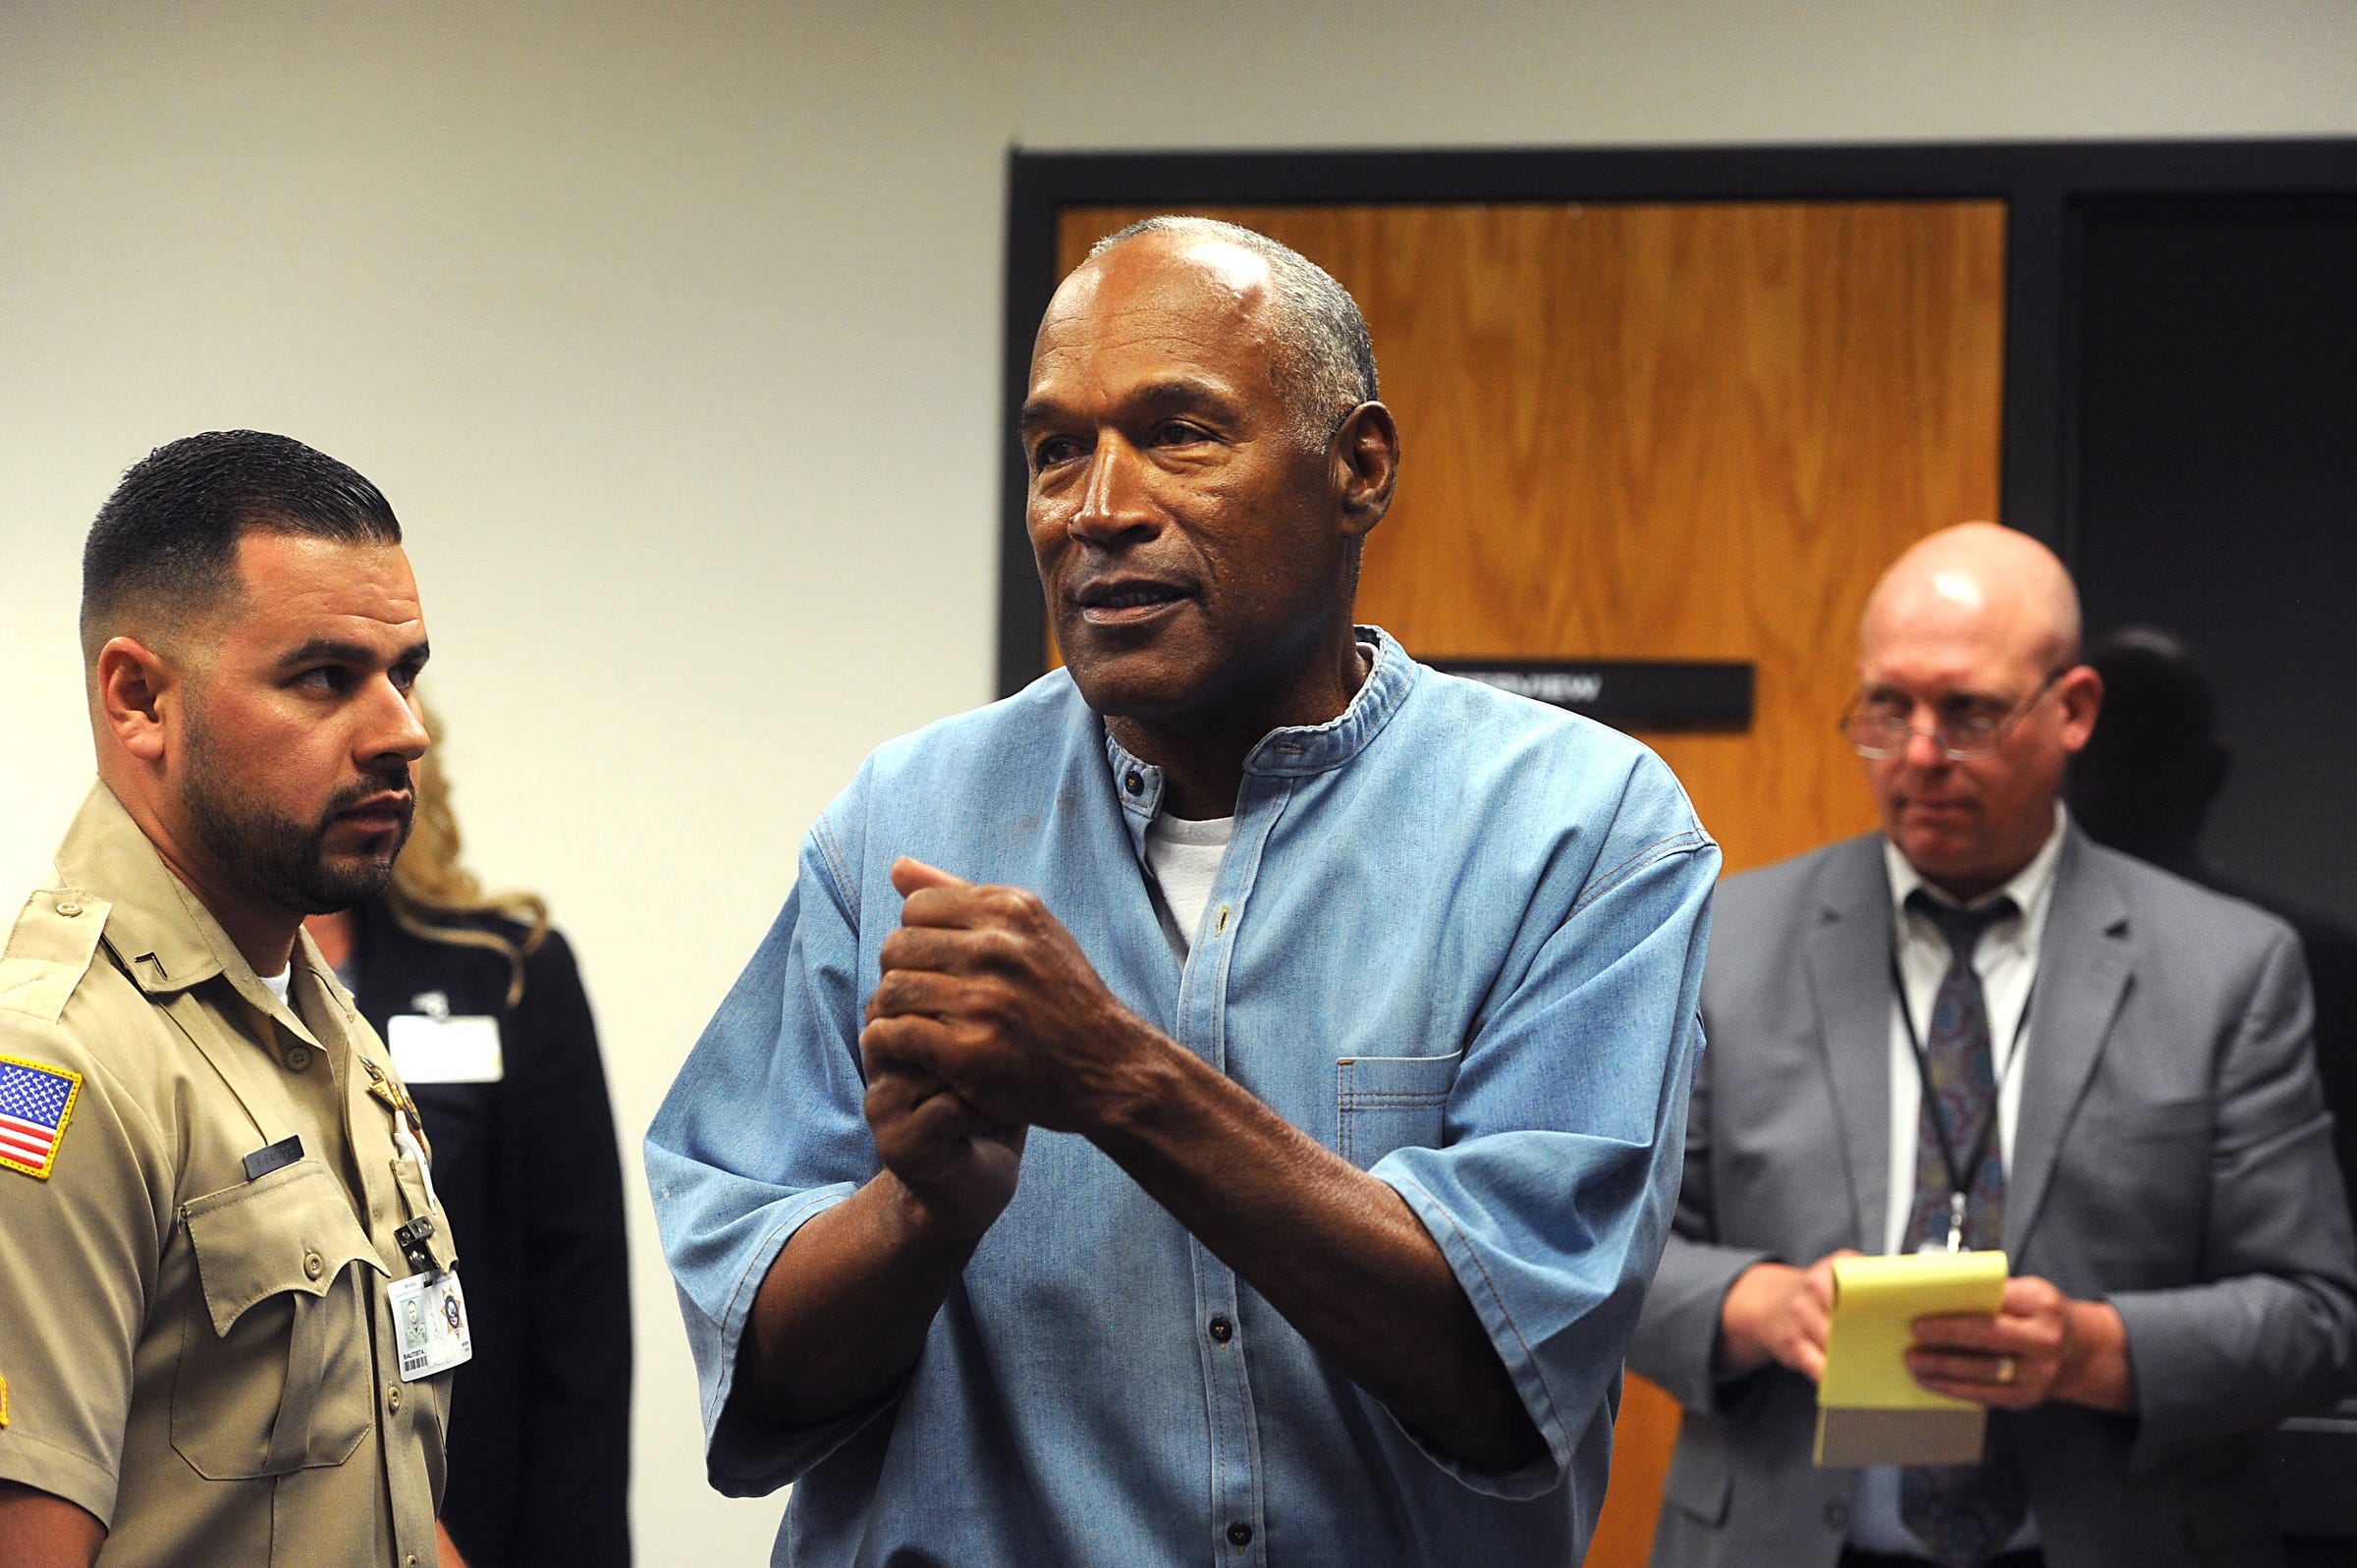 O.J. Simpson likely to return to Florida after his release